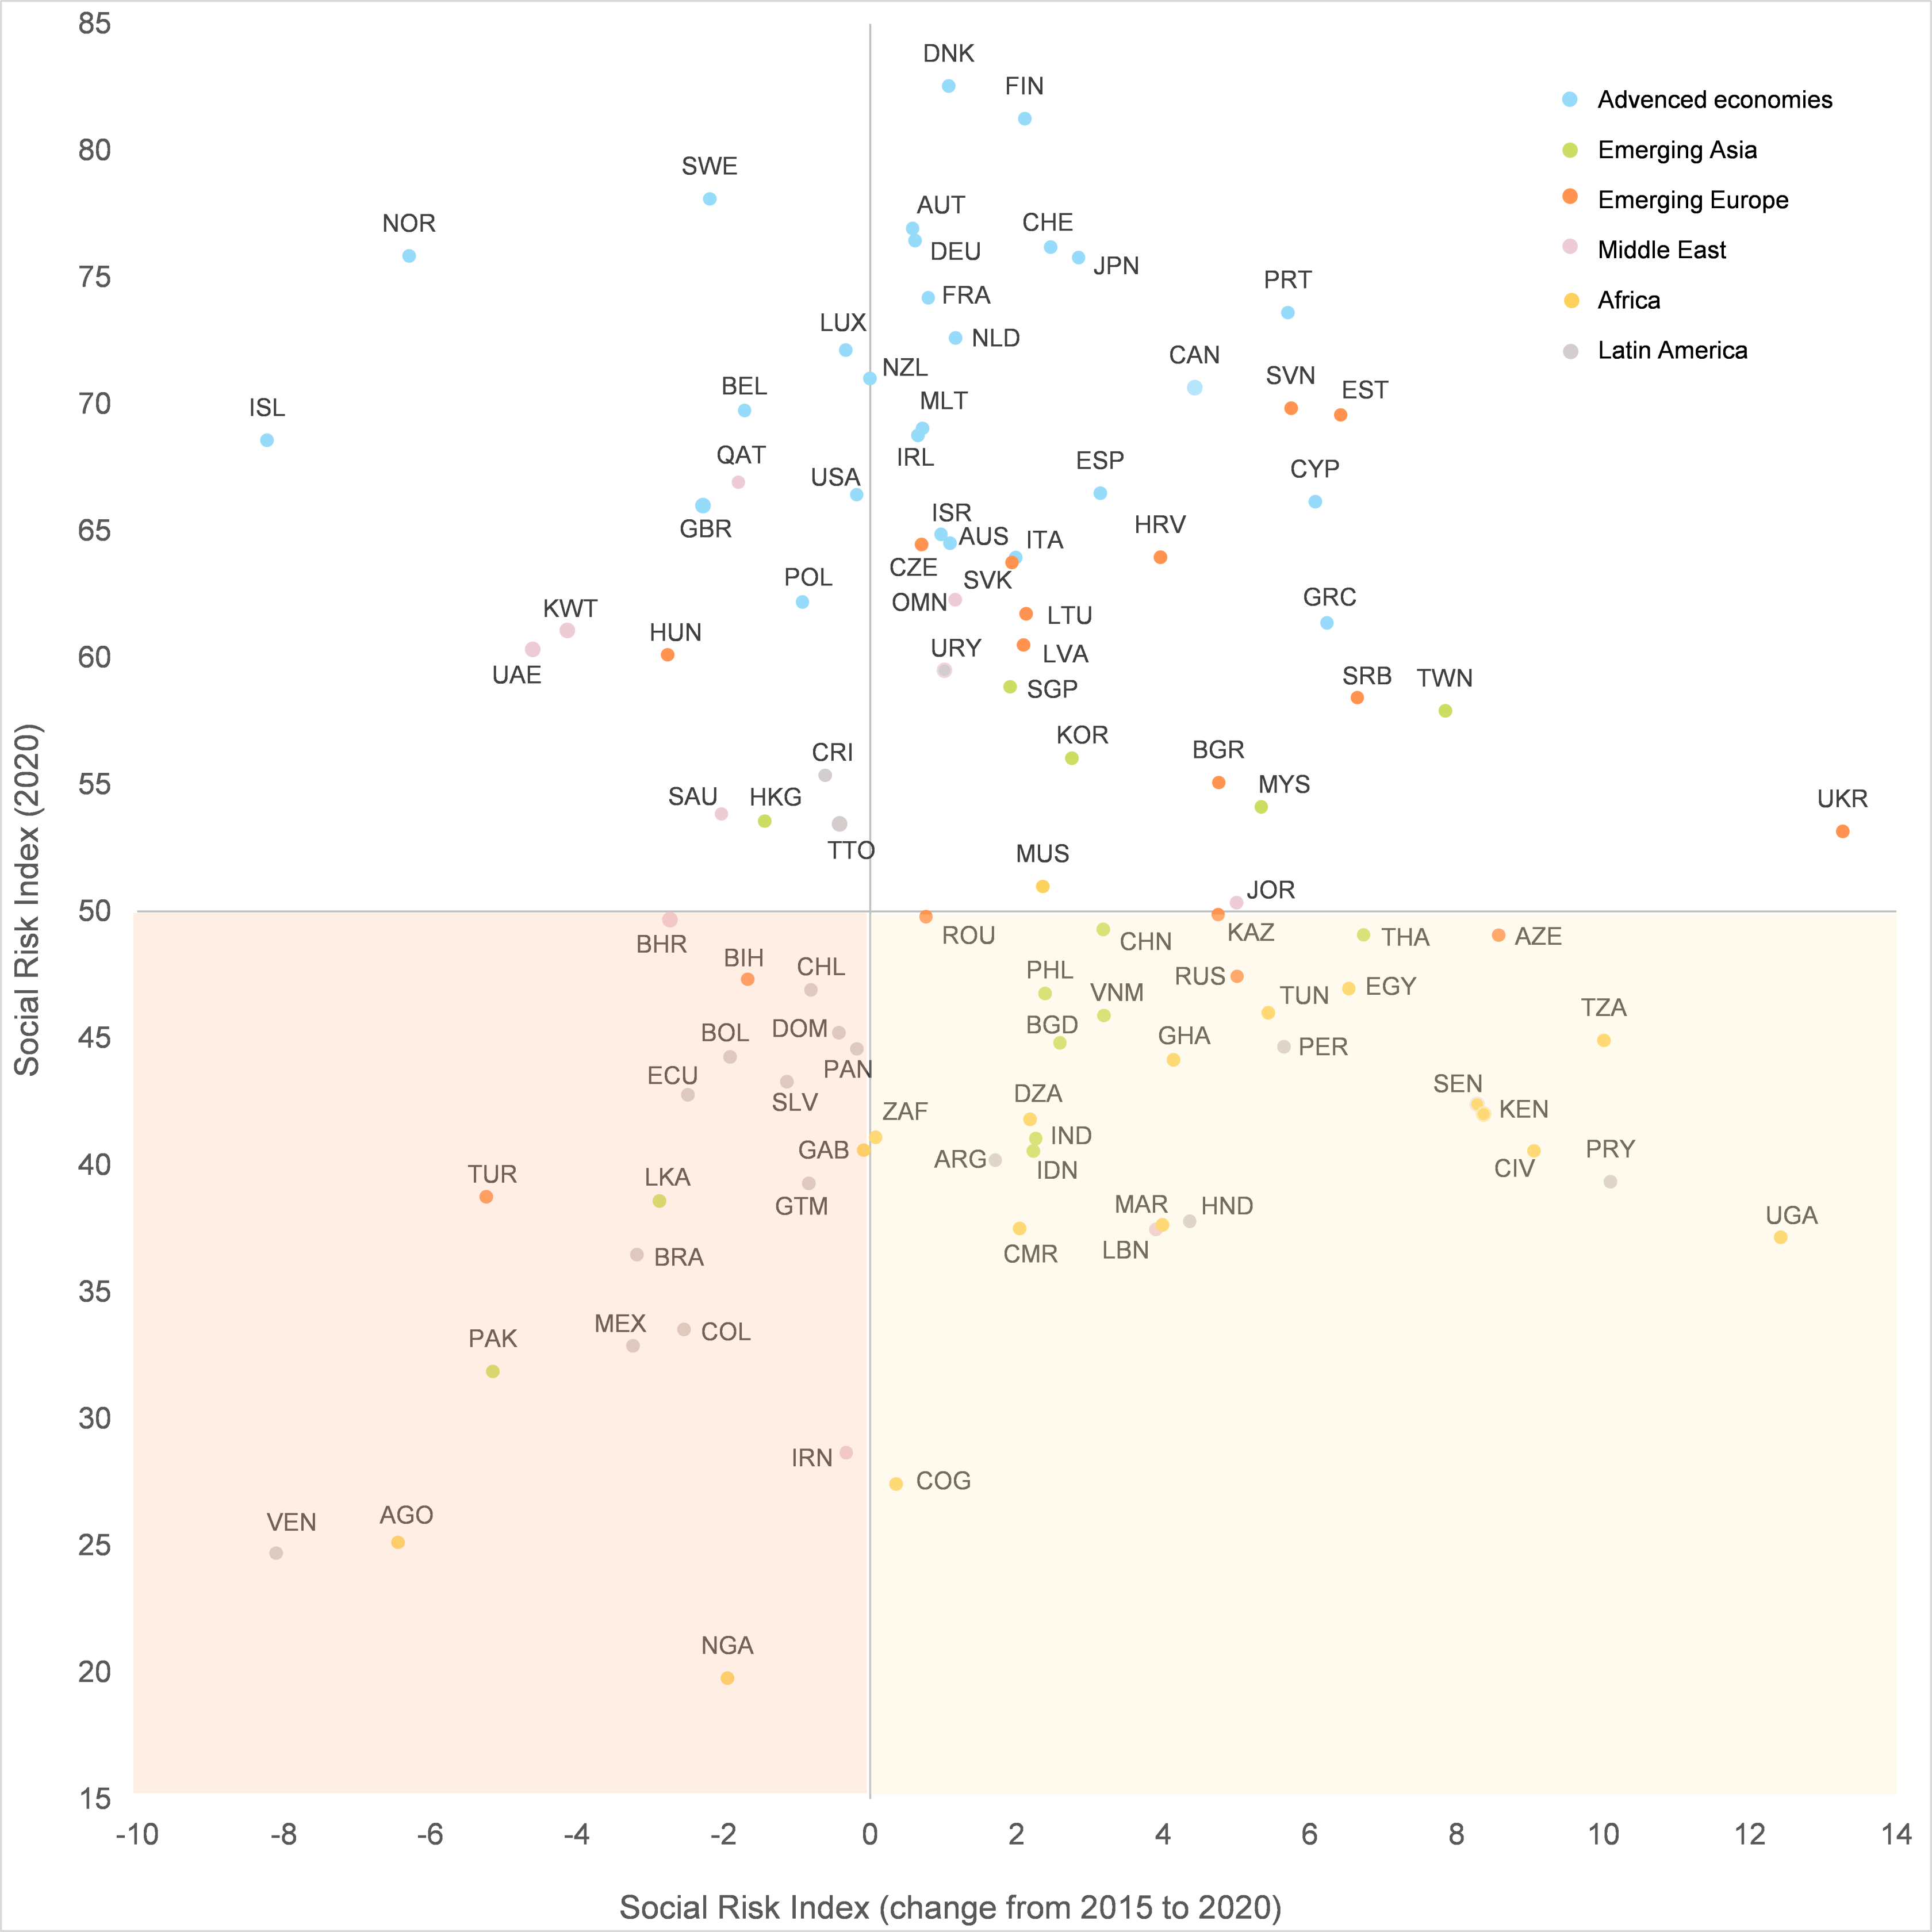 Figure 2: Social Risk Index versus its change over the last 5 years for 102 selected economies